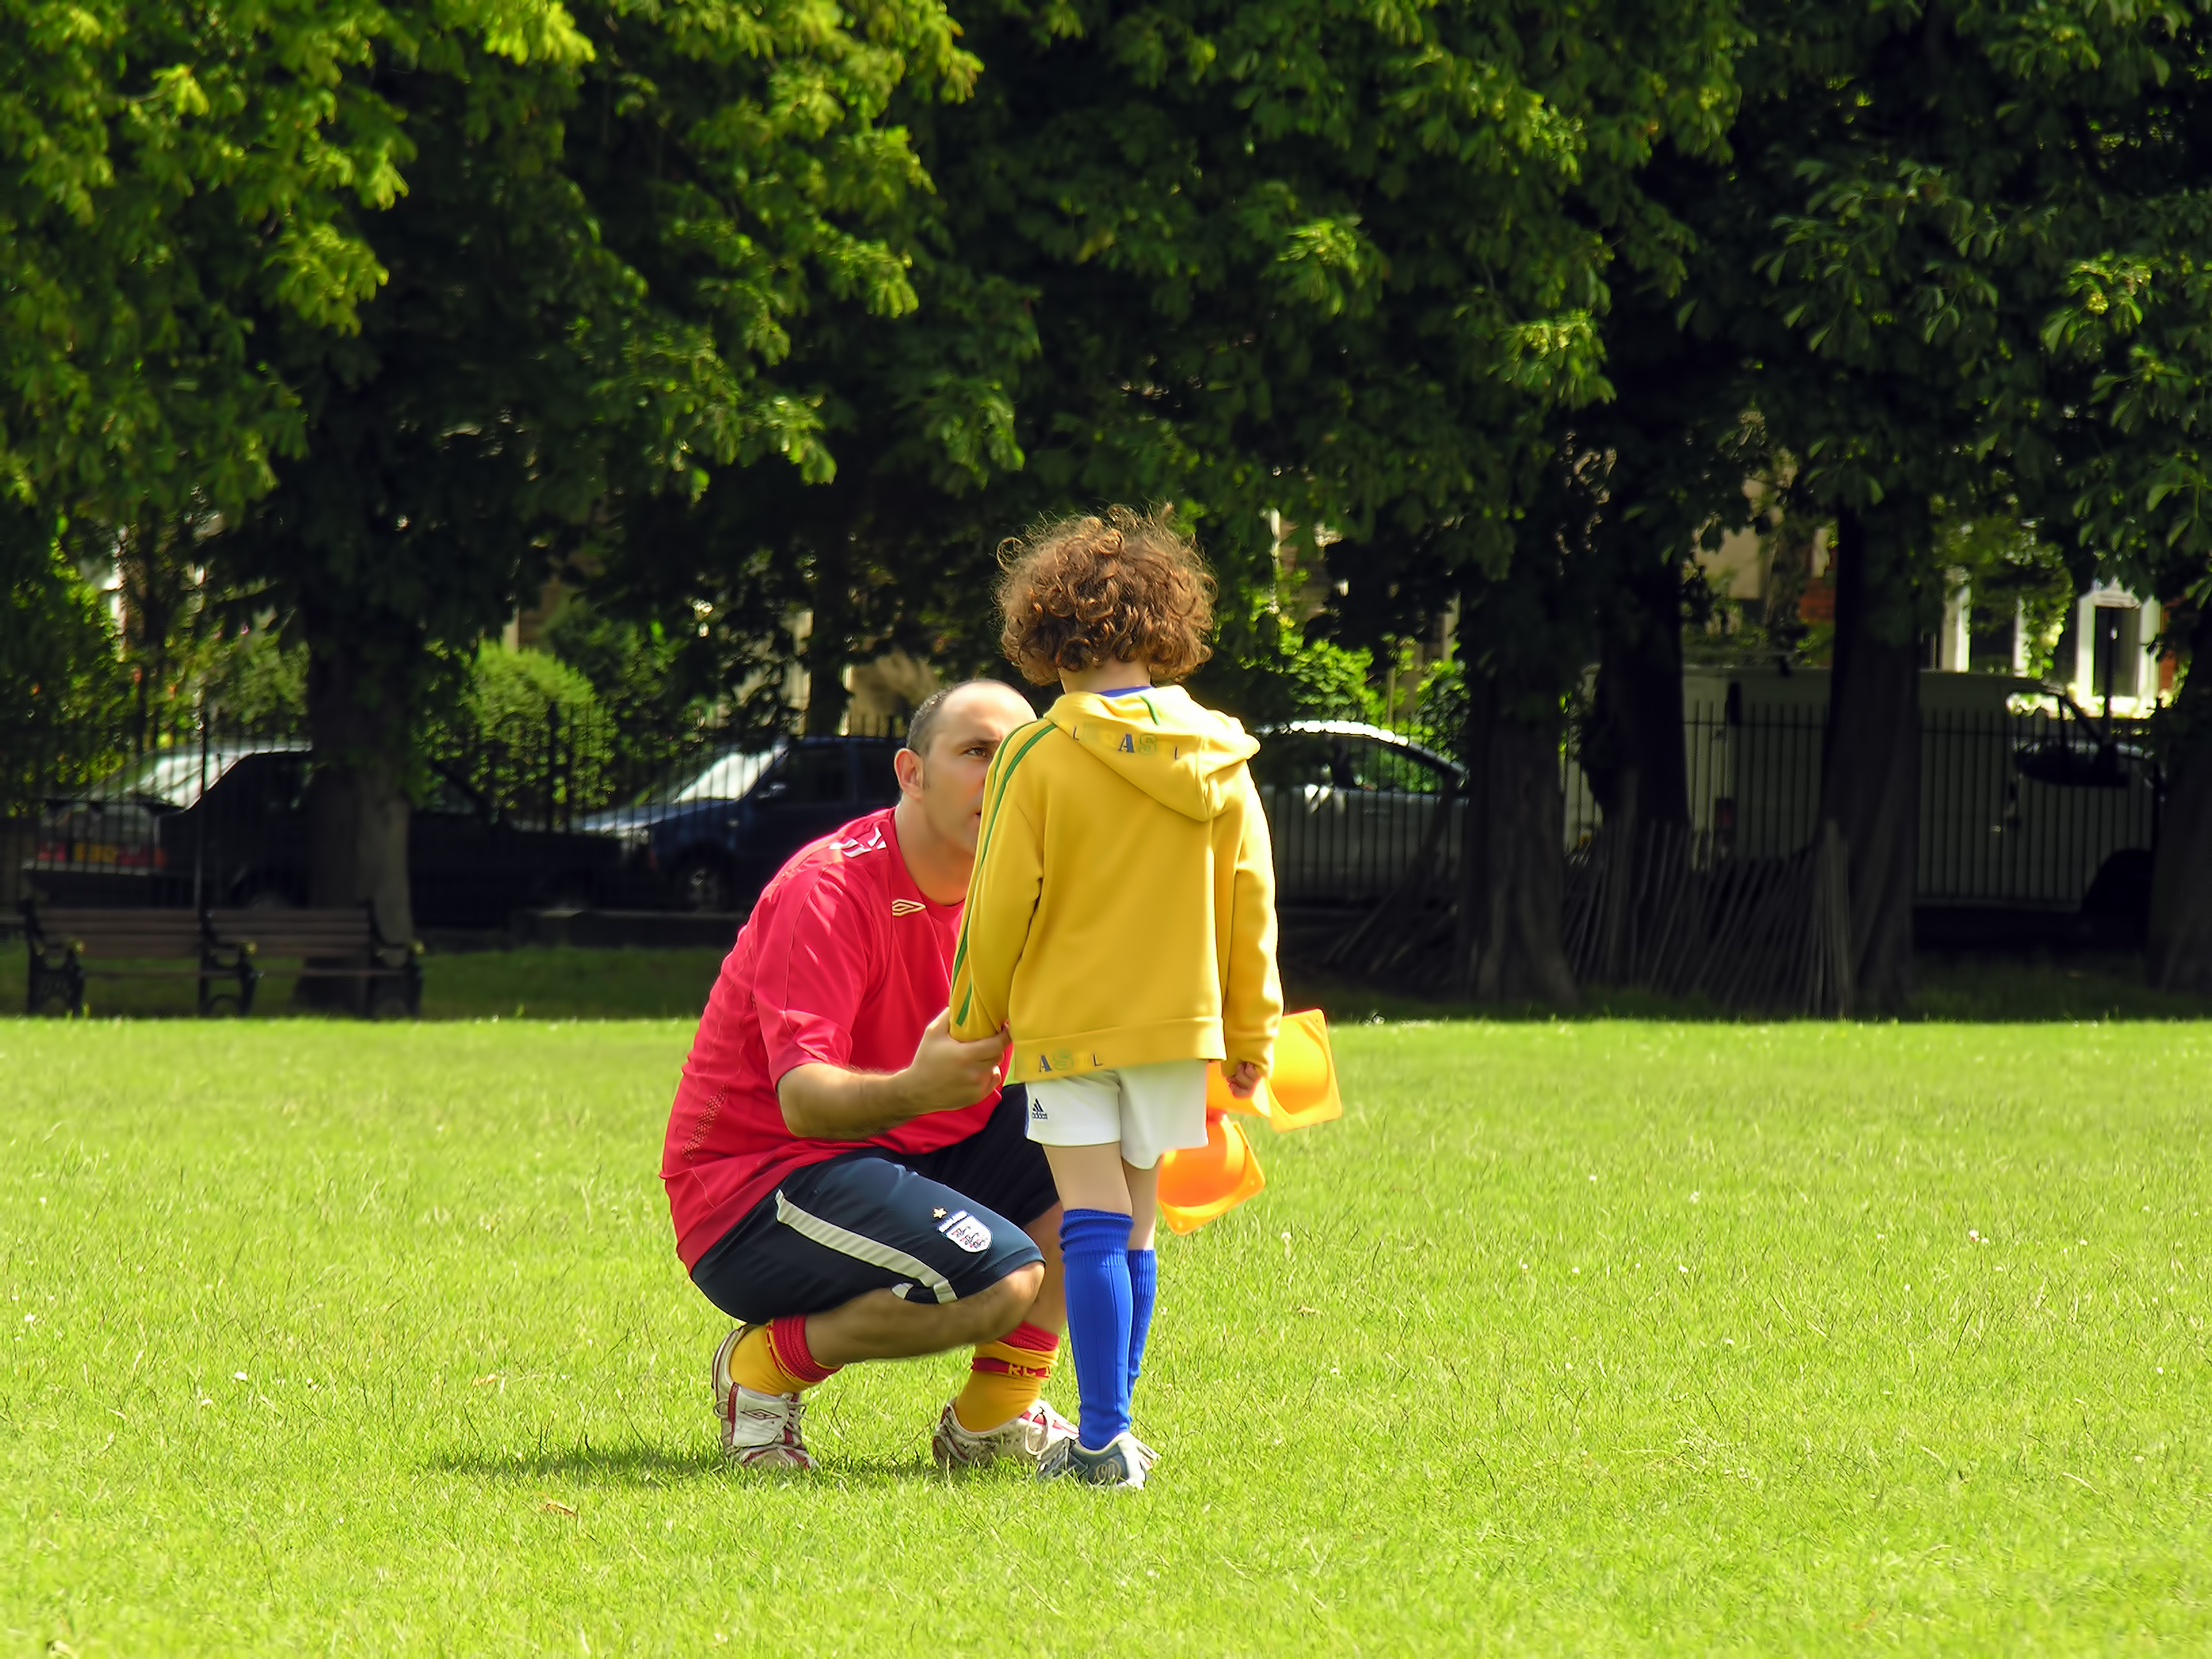 Being a parent AND a great coach